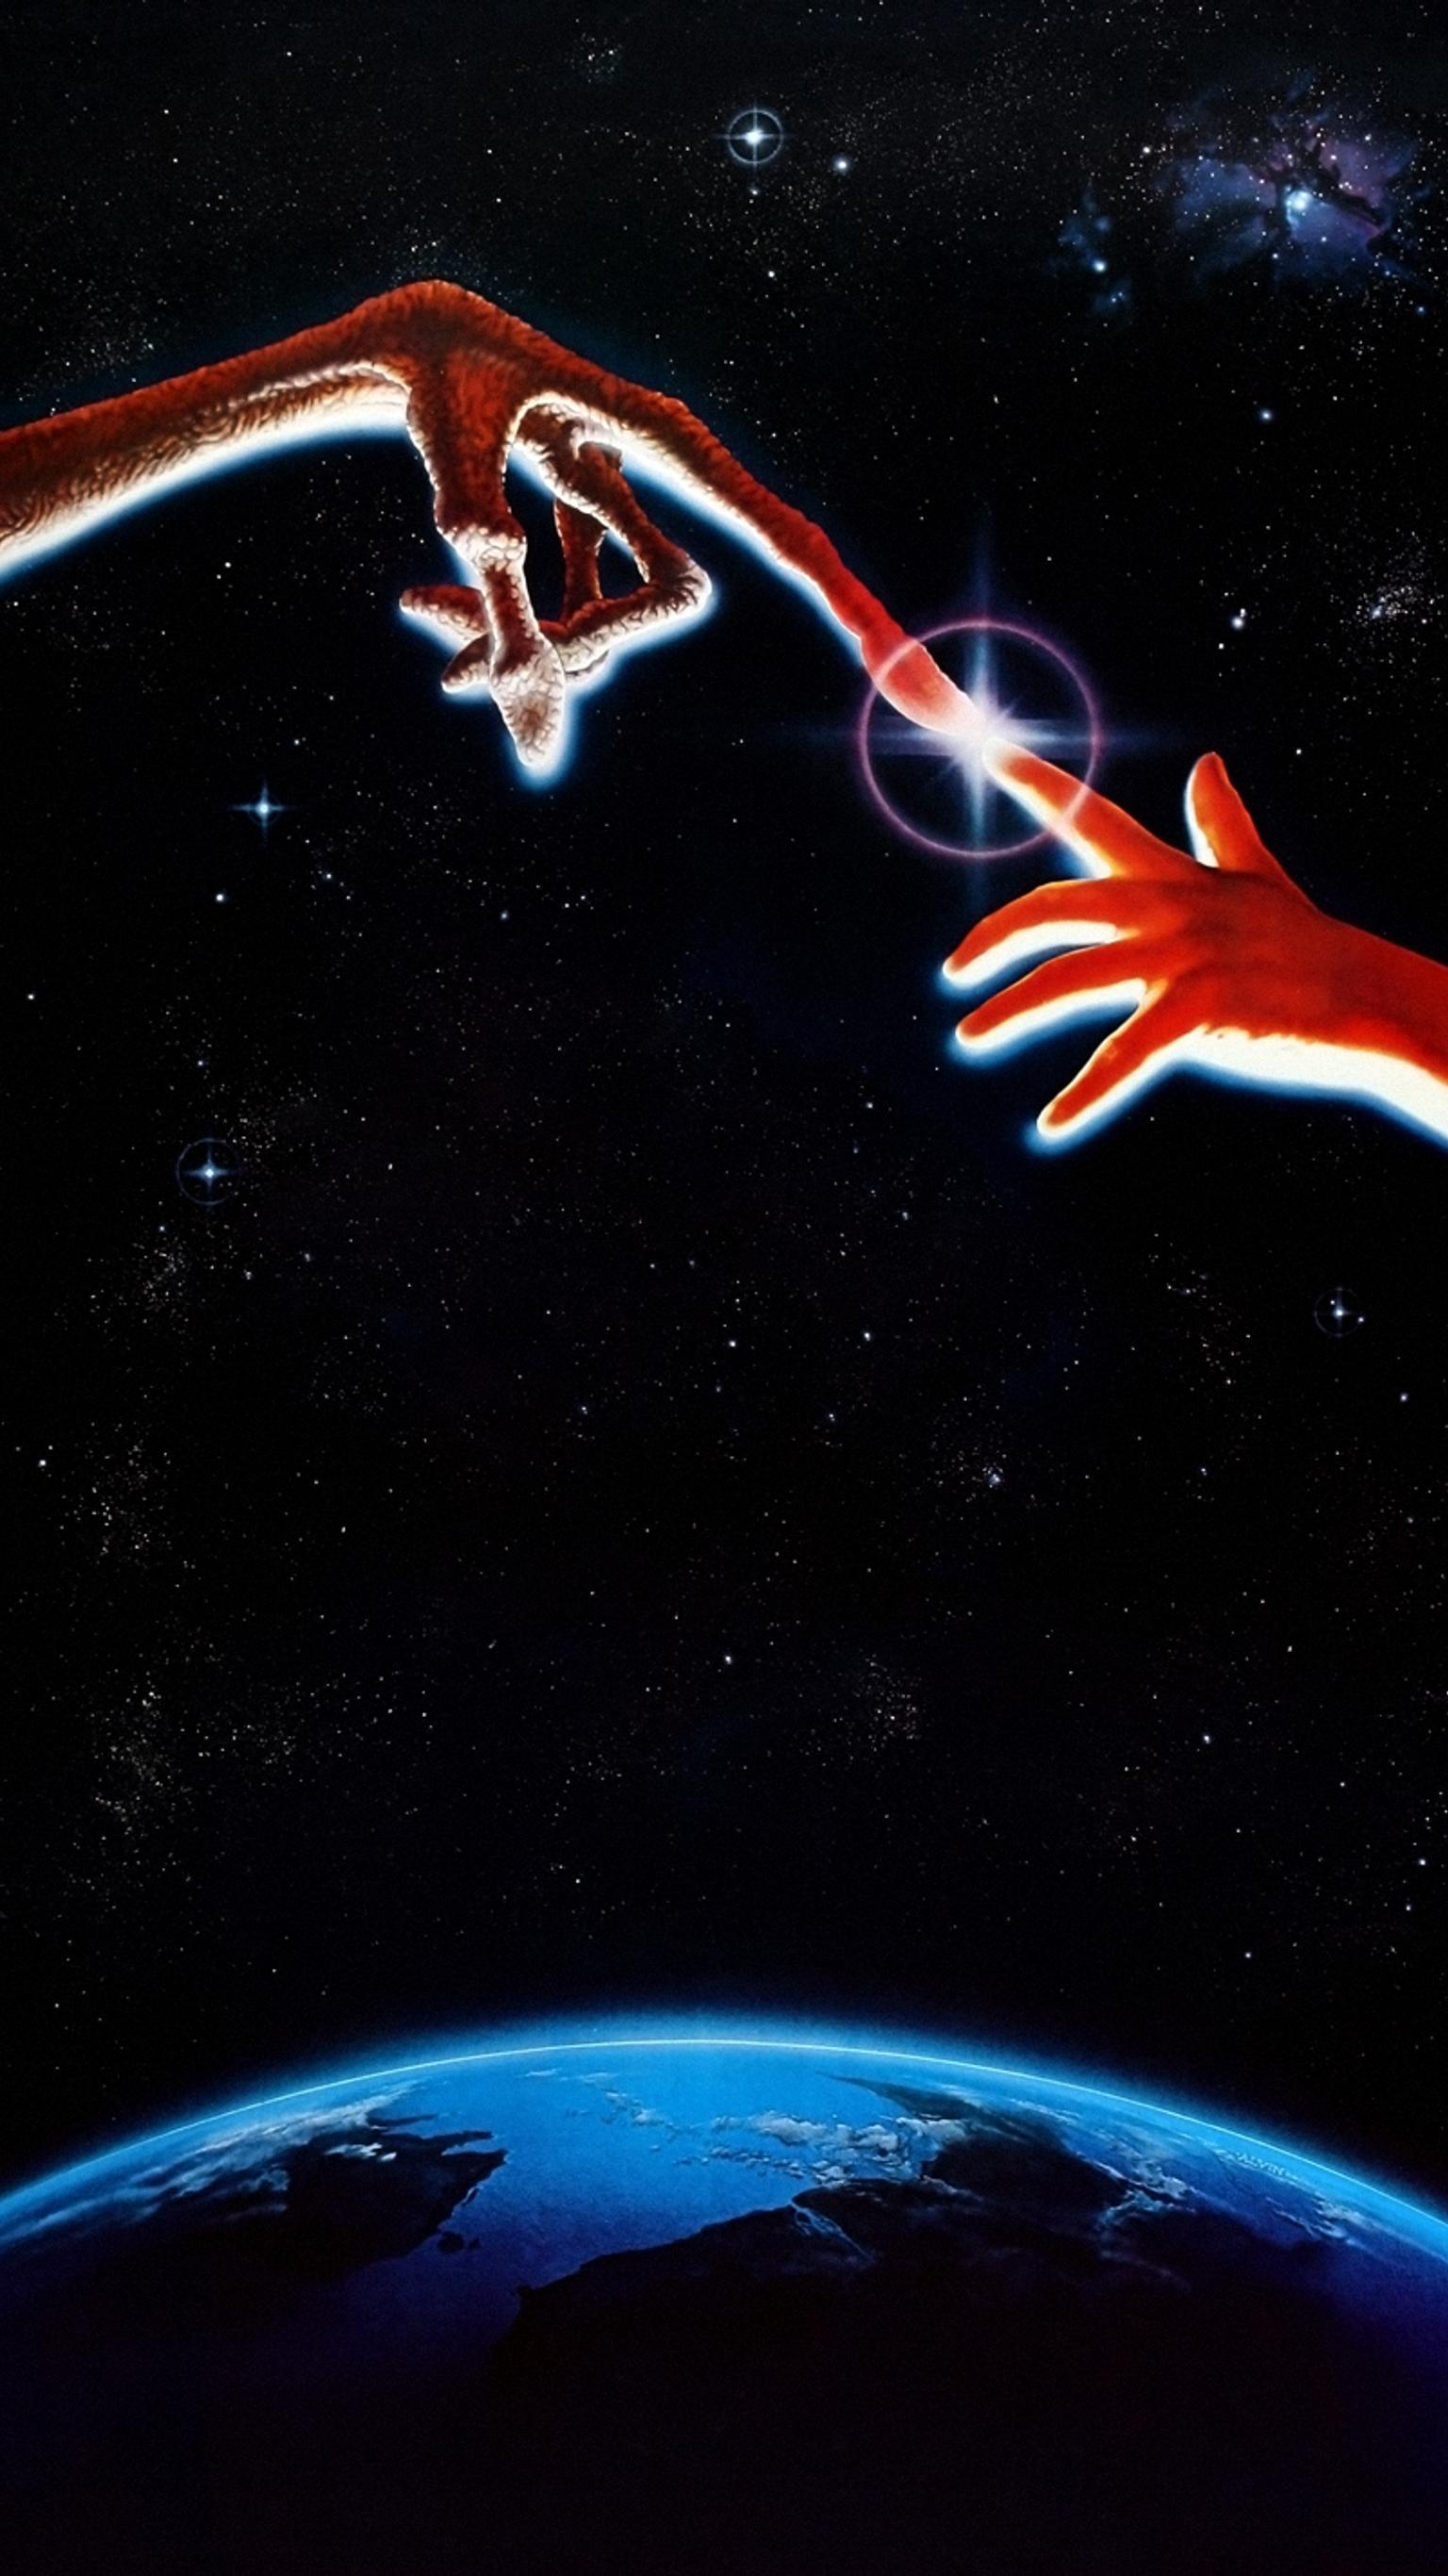 E.T. The Extra Terrestrial (1982) Phone Wallpaper